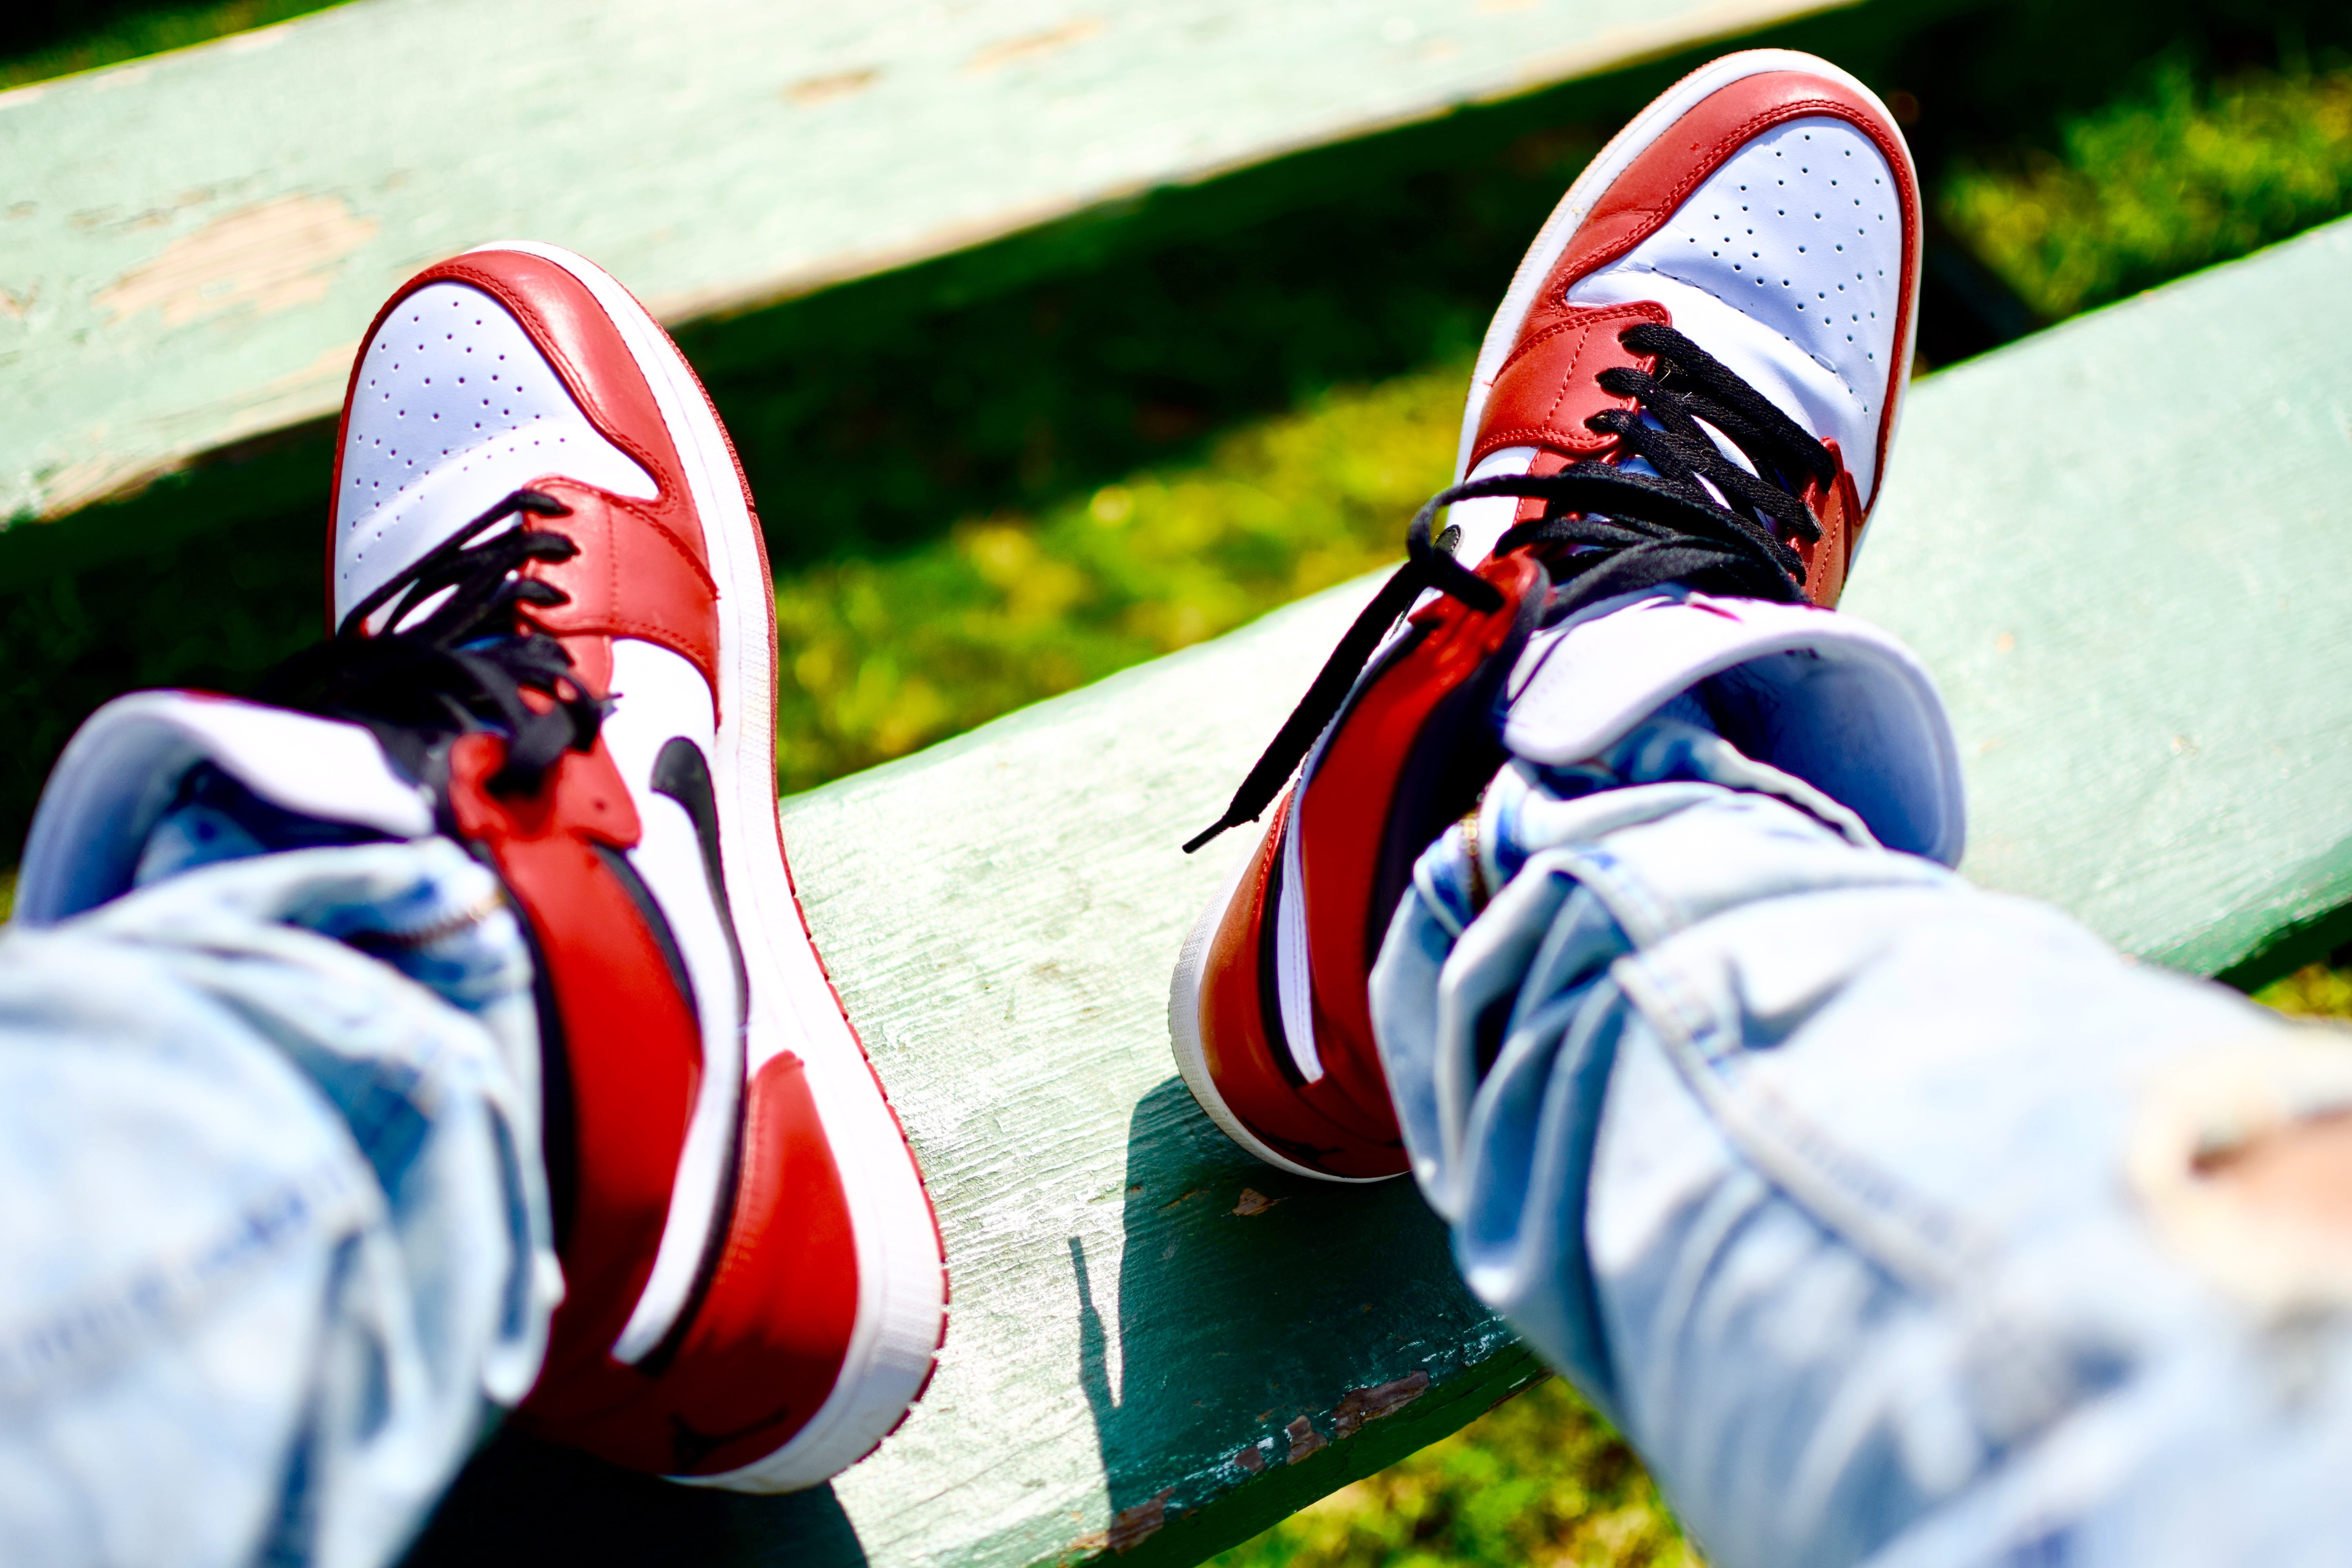 Kicks and Clicks, person wearing red-white-and-black Nike high-top sneakers